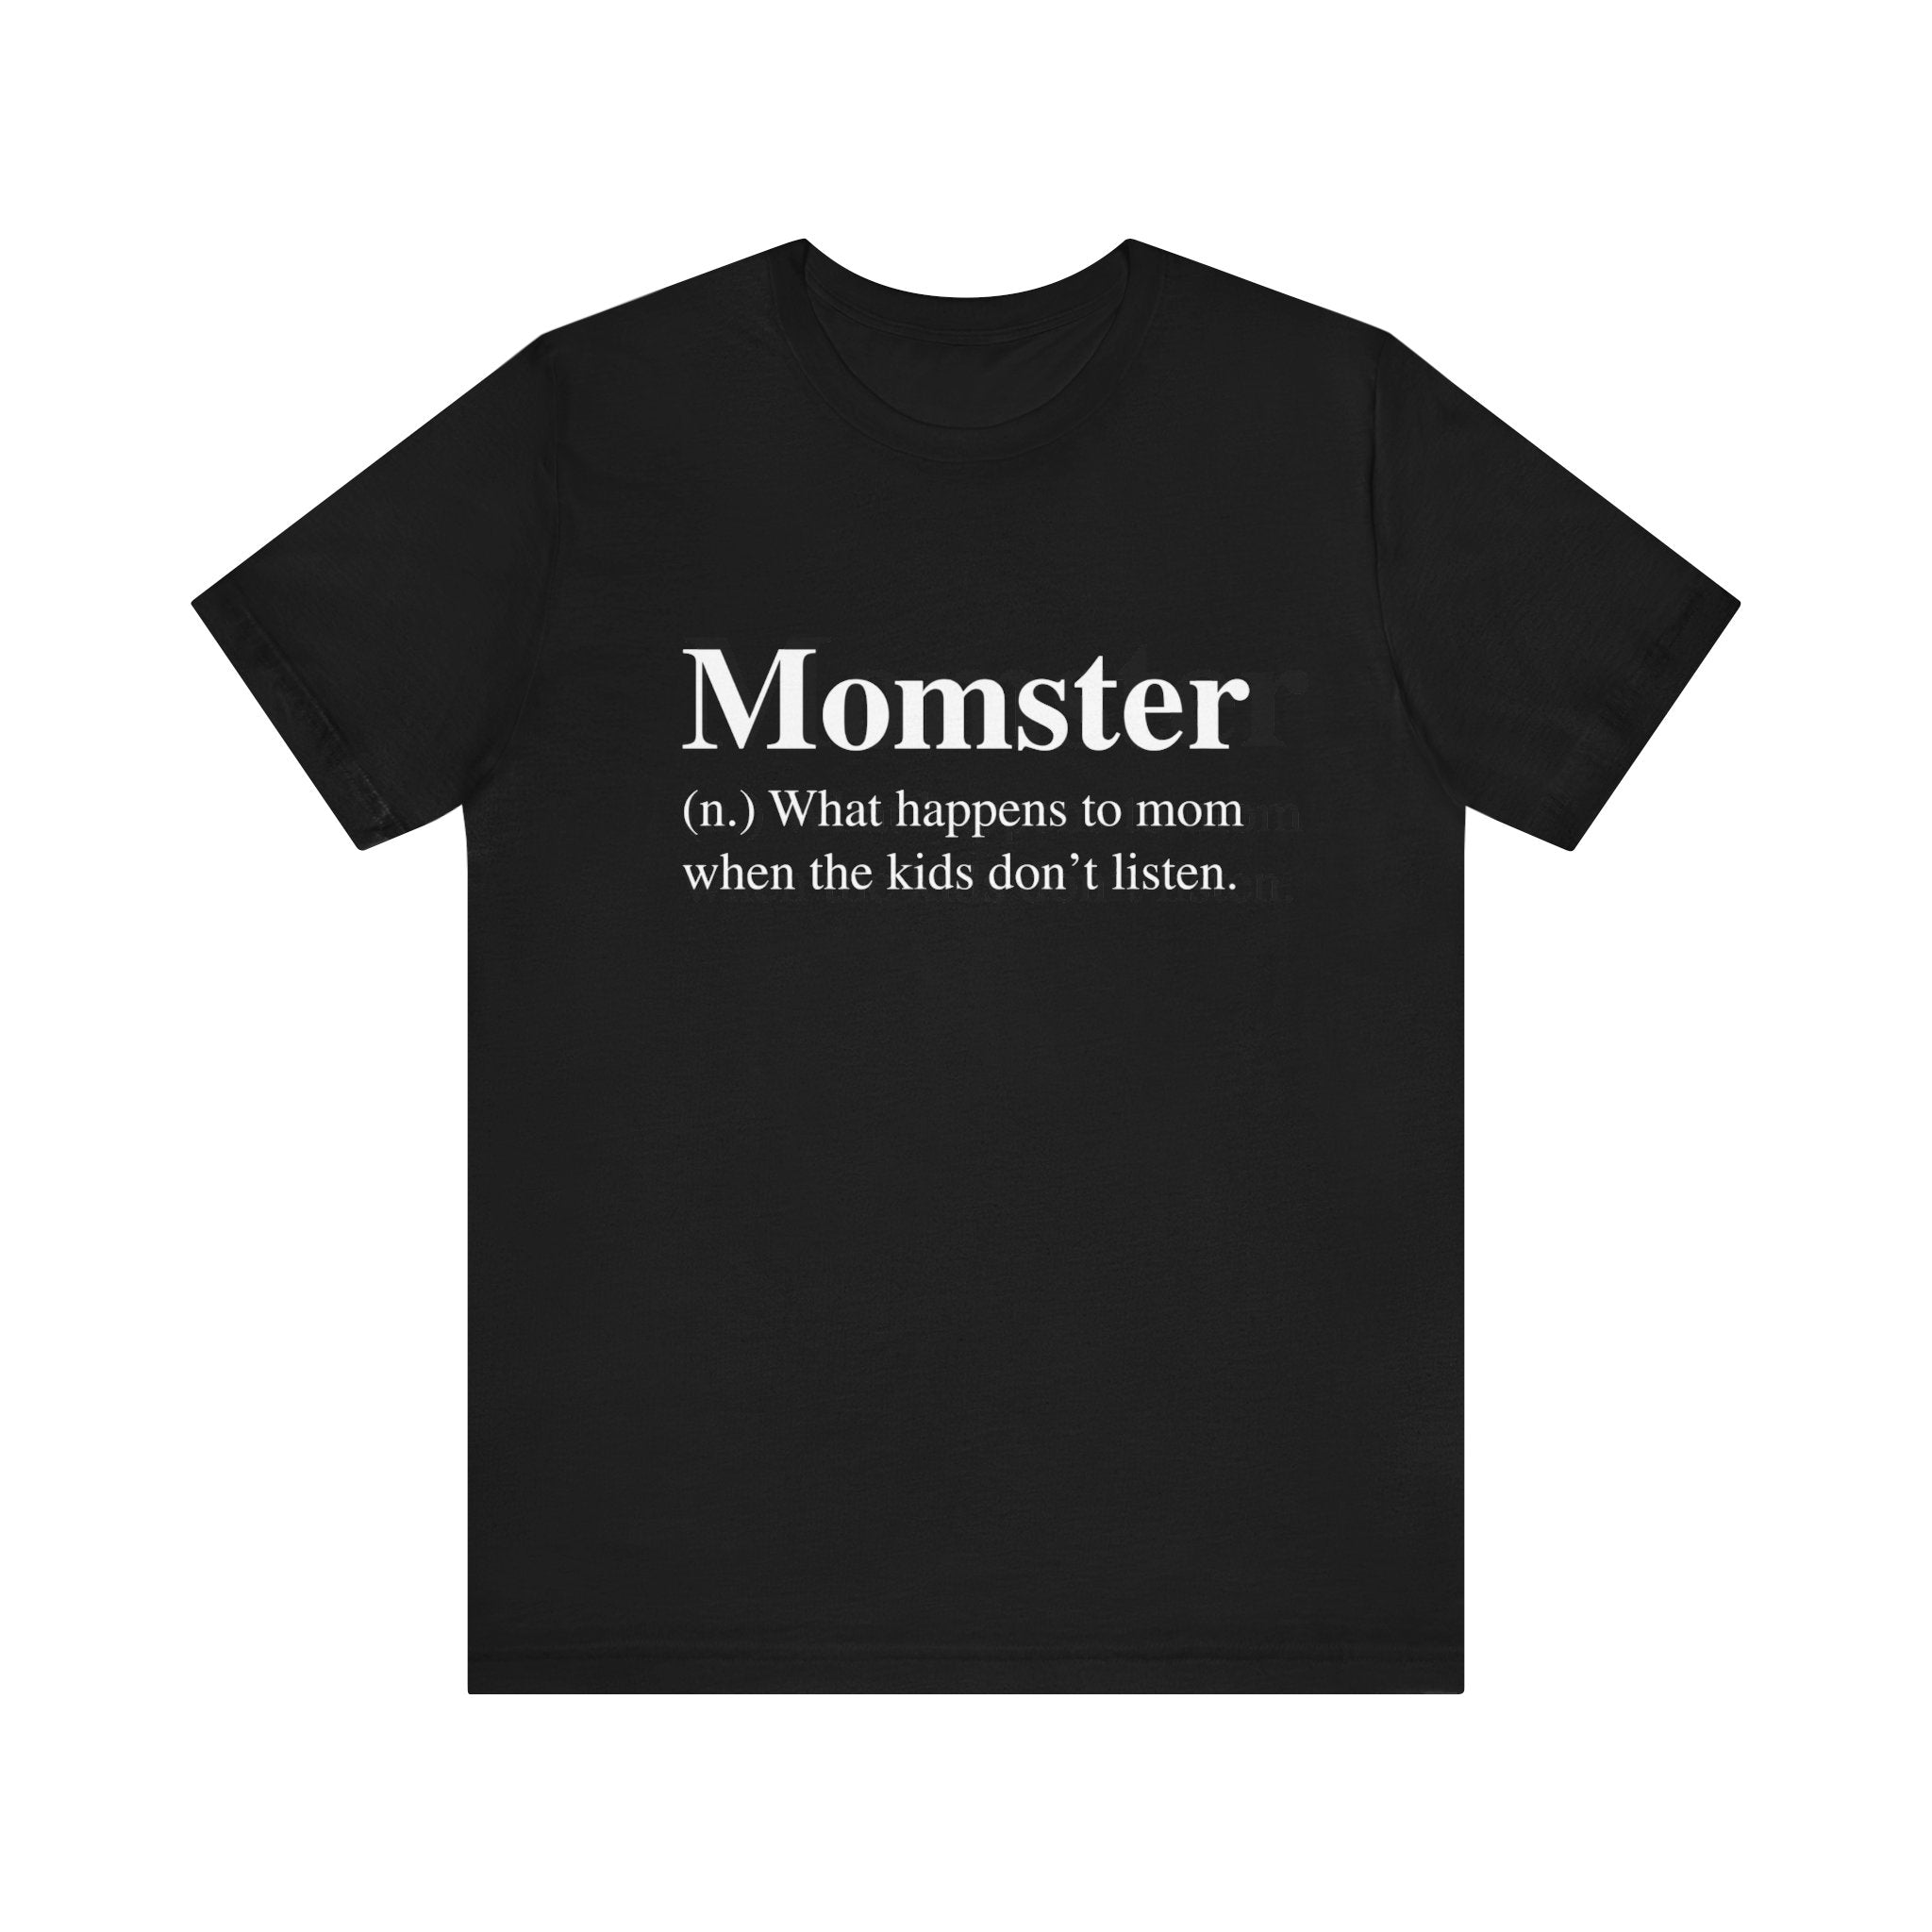 Soft cotton Momster T-Shirt featuring the text "Momster (n.) what happens to mom when the kids don't listen." in white font.